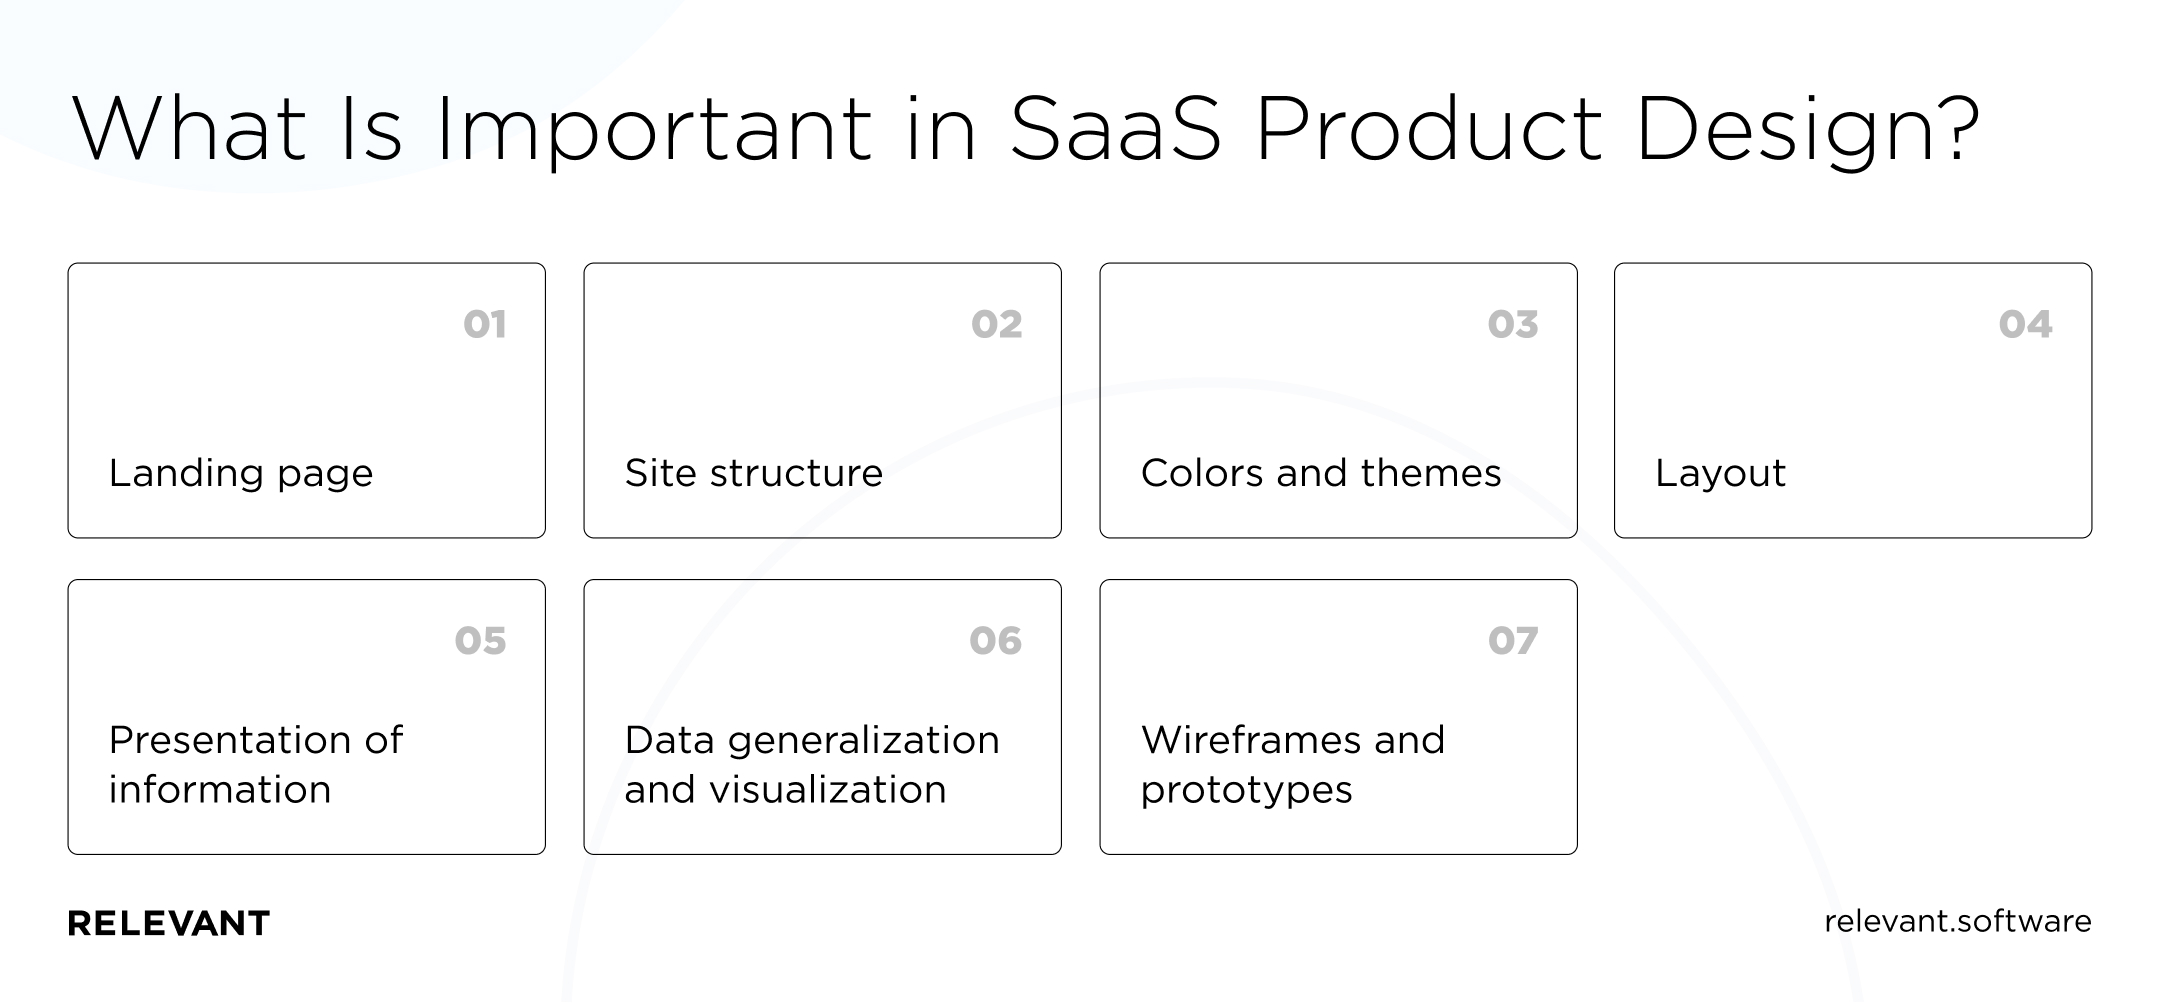 What Is Important in SaaS Design